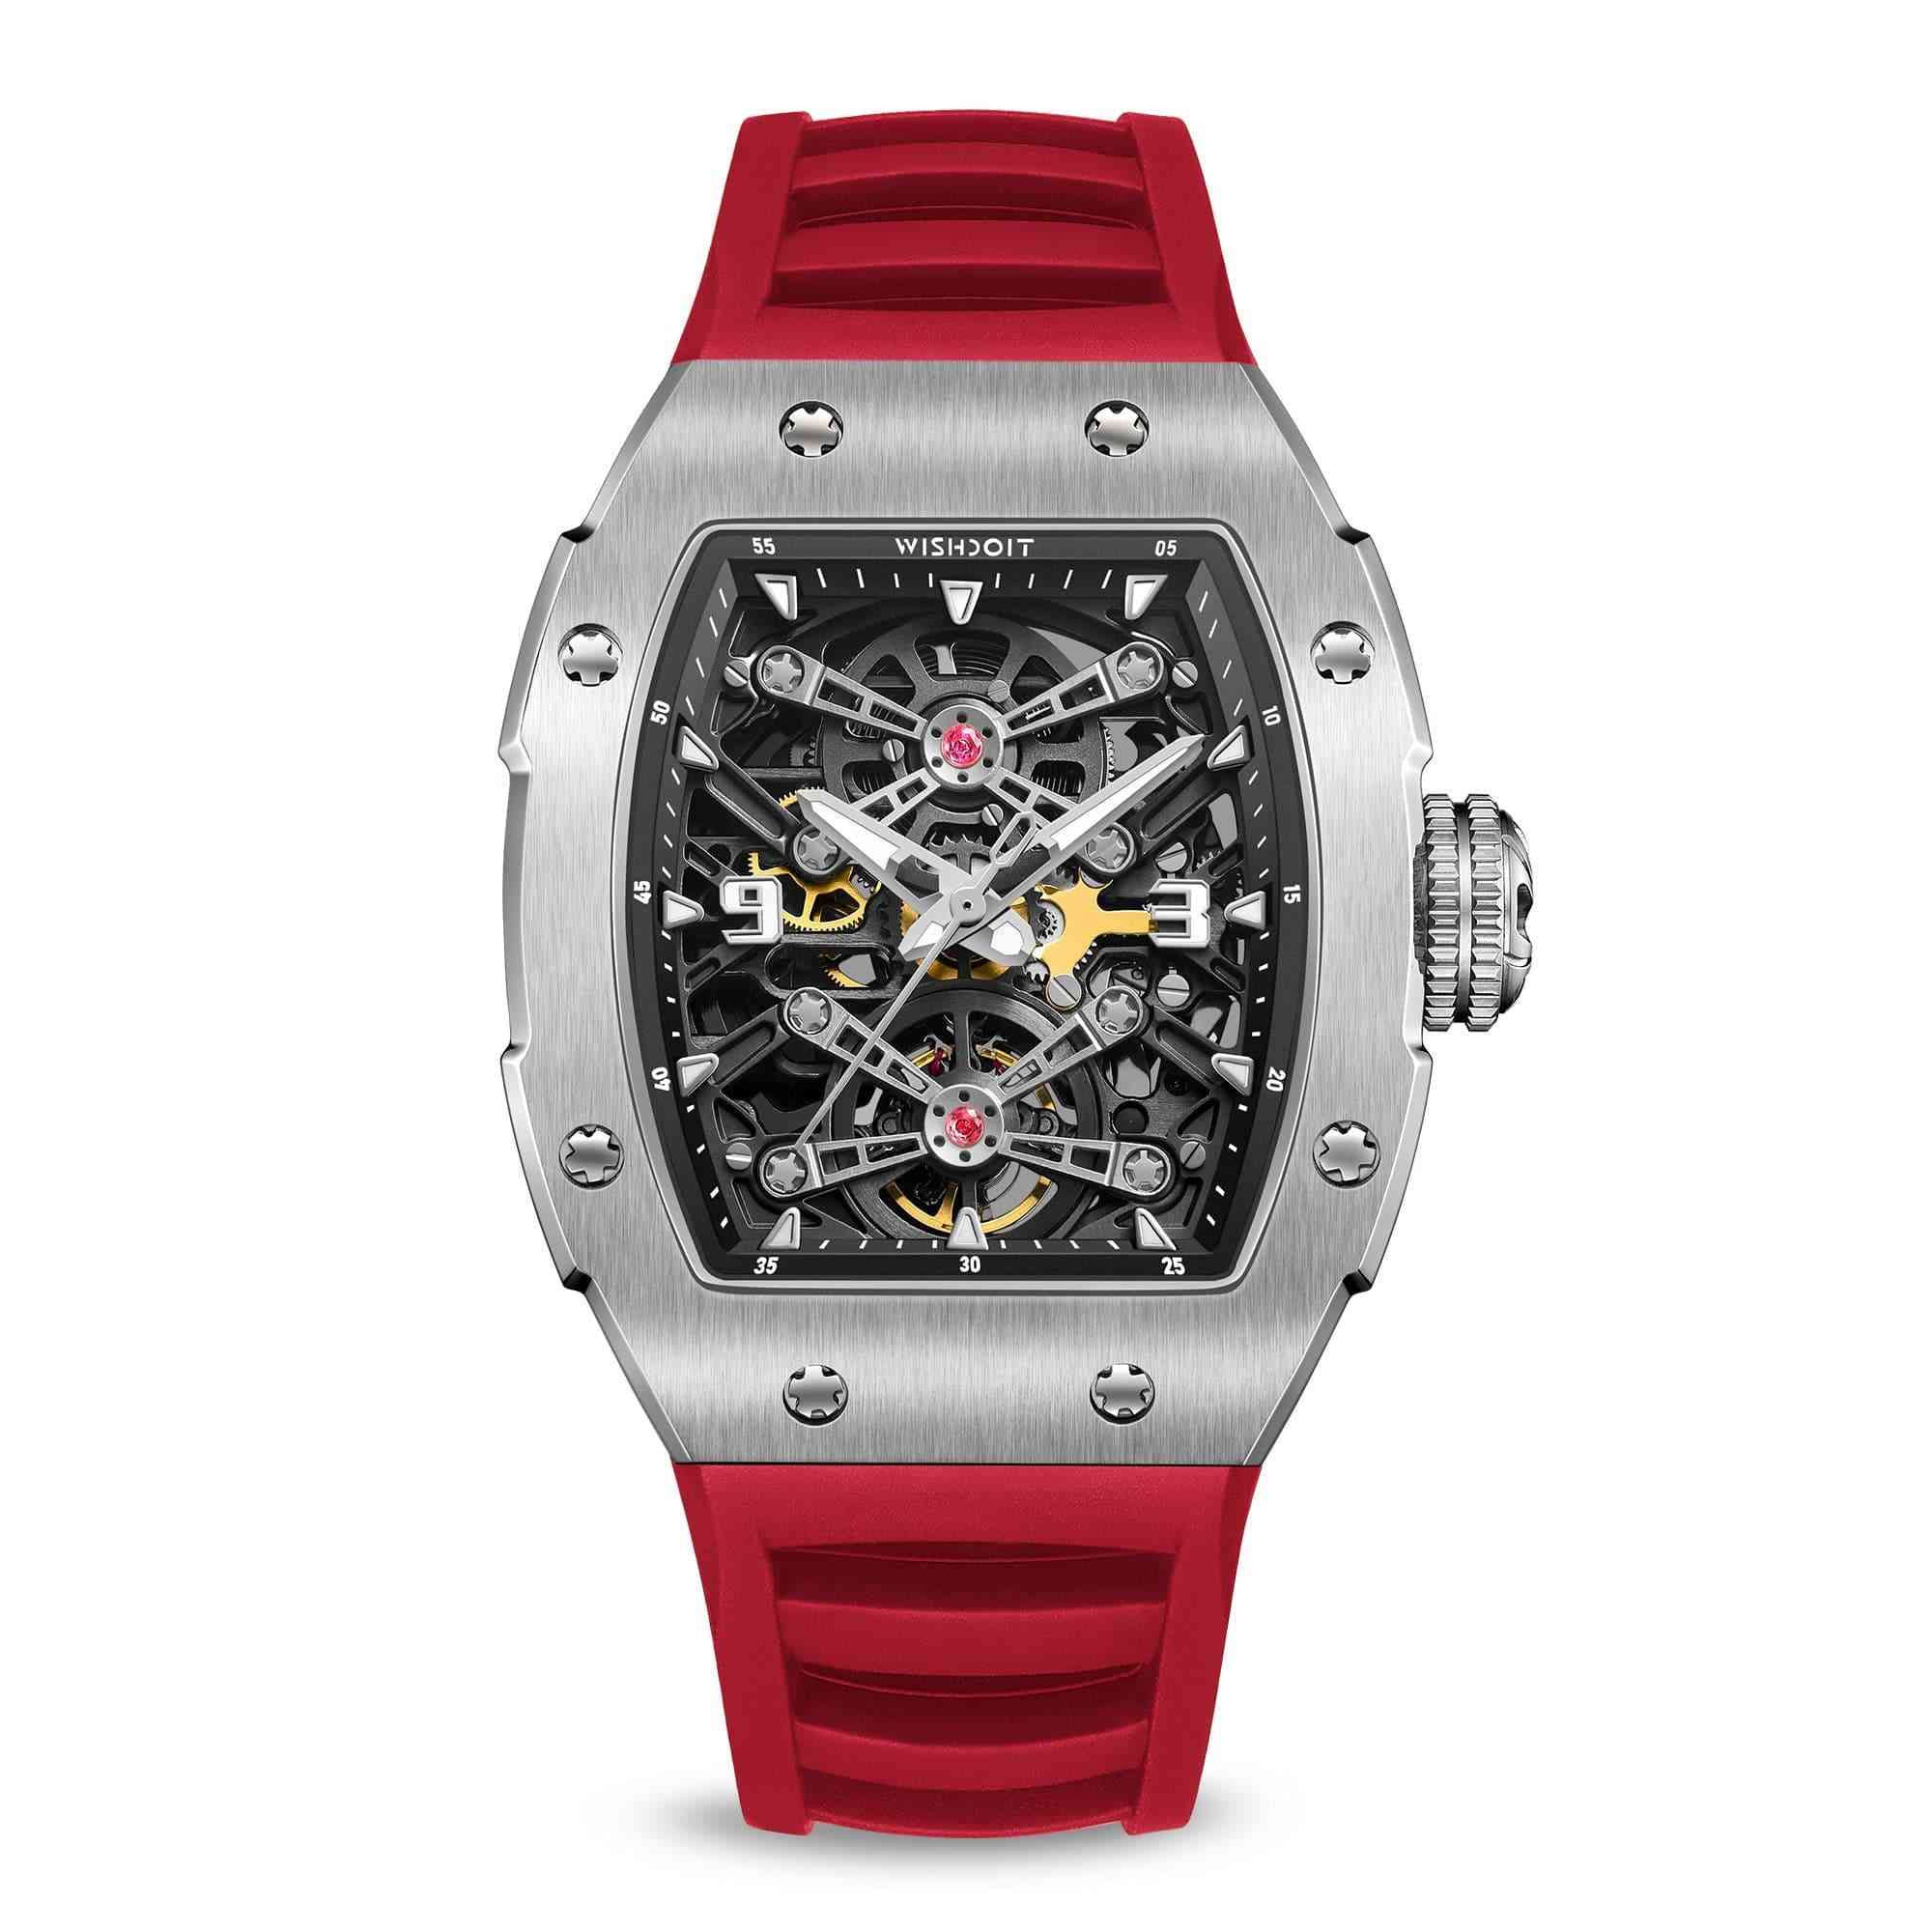 Captain Kidd Mechanical Watches- Silvery Red | Wishdoit Watches